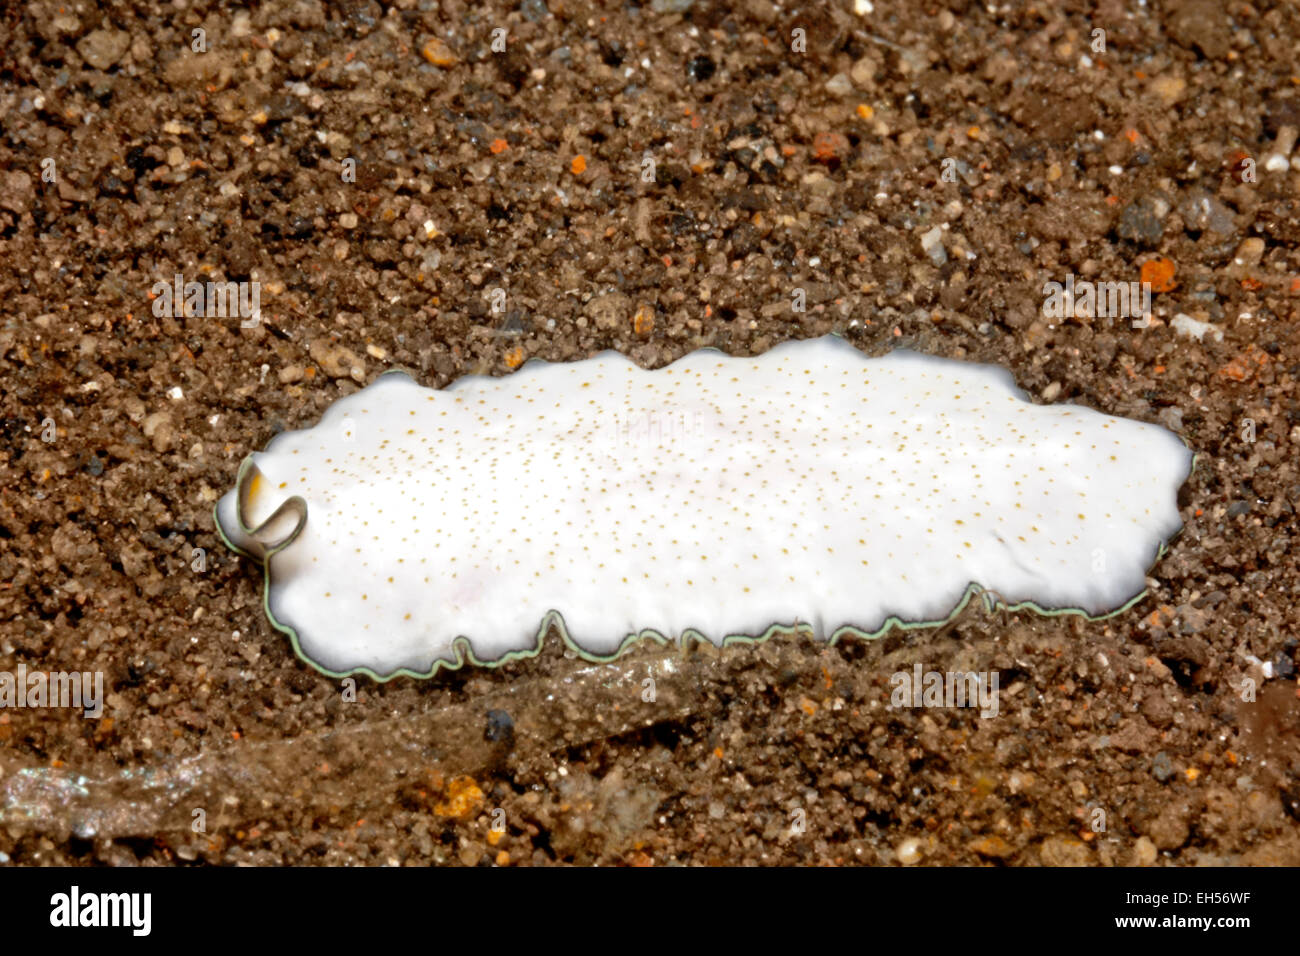 An undescribed species of marine flatworm, Pseudoceros sp. Stock Photo